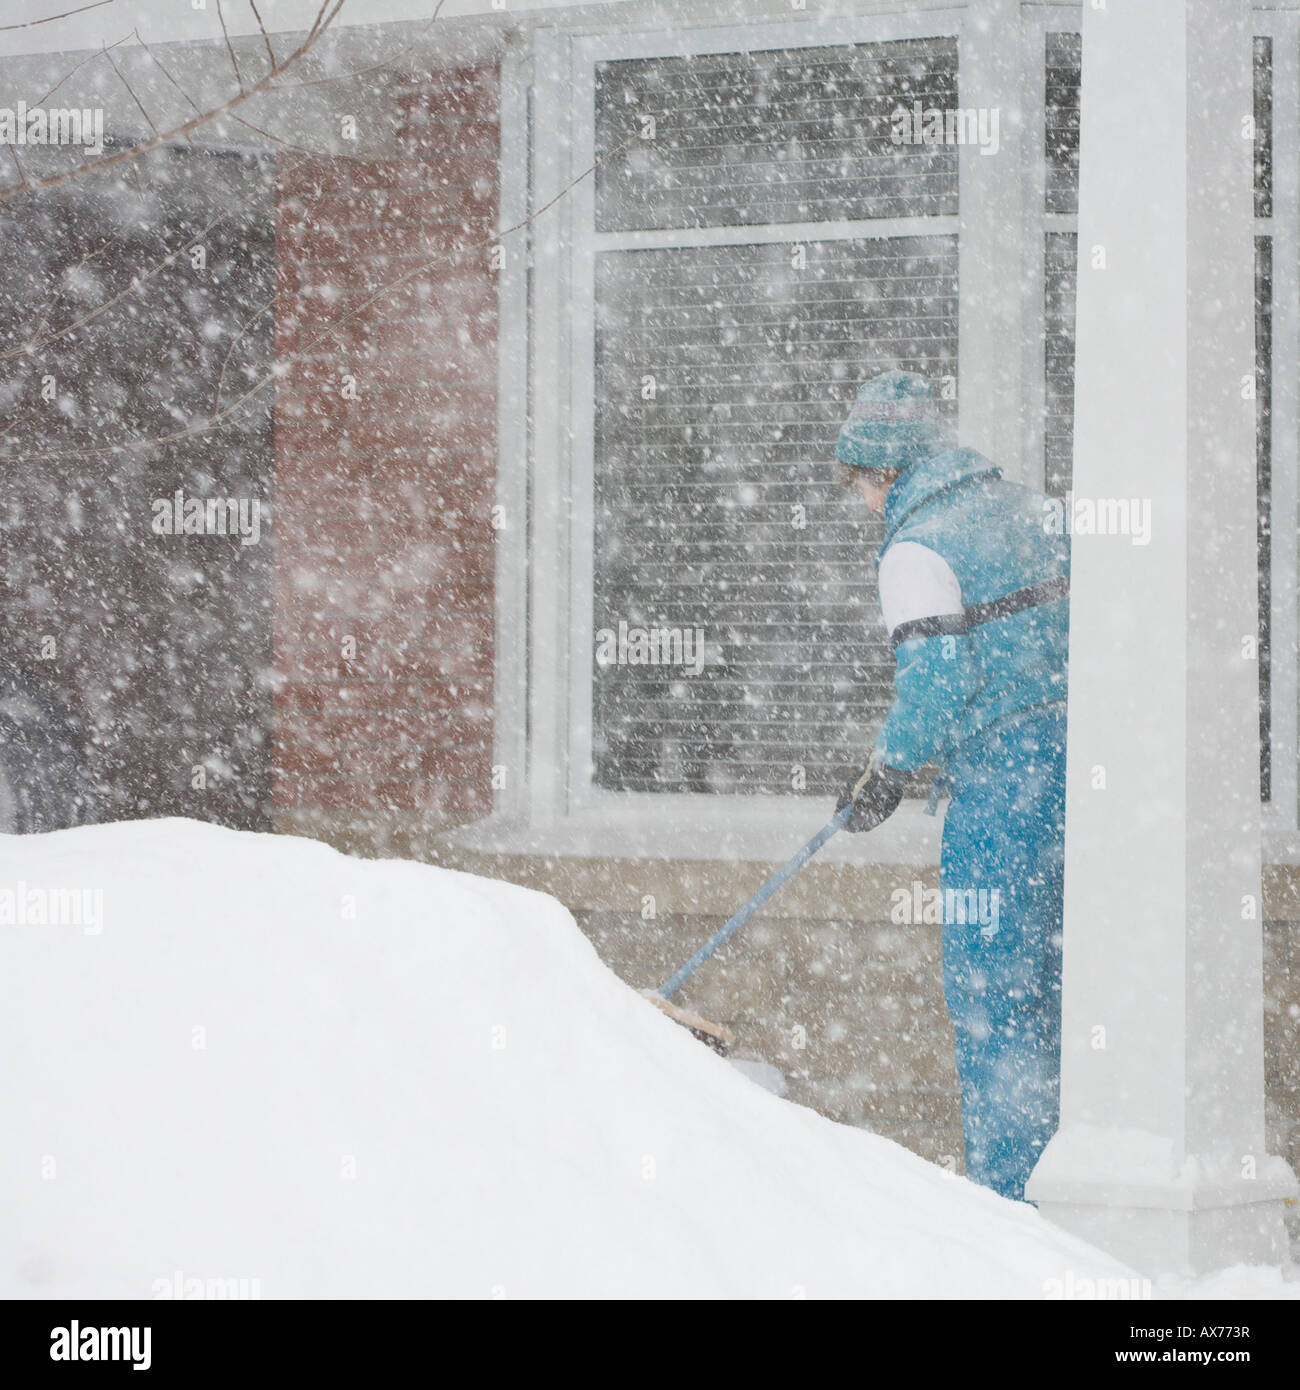 Clearing Snow A woman in a blue snow suit brushes snow off a porch while large fresh flakes pour down Stock Photo